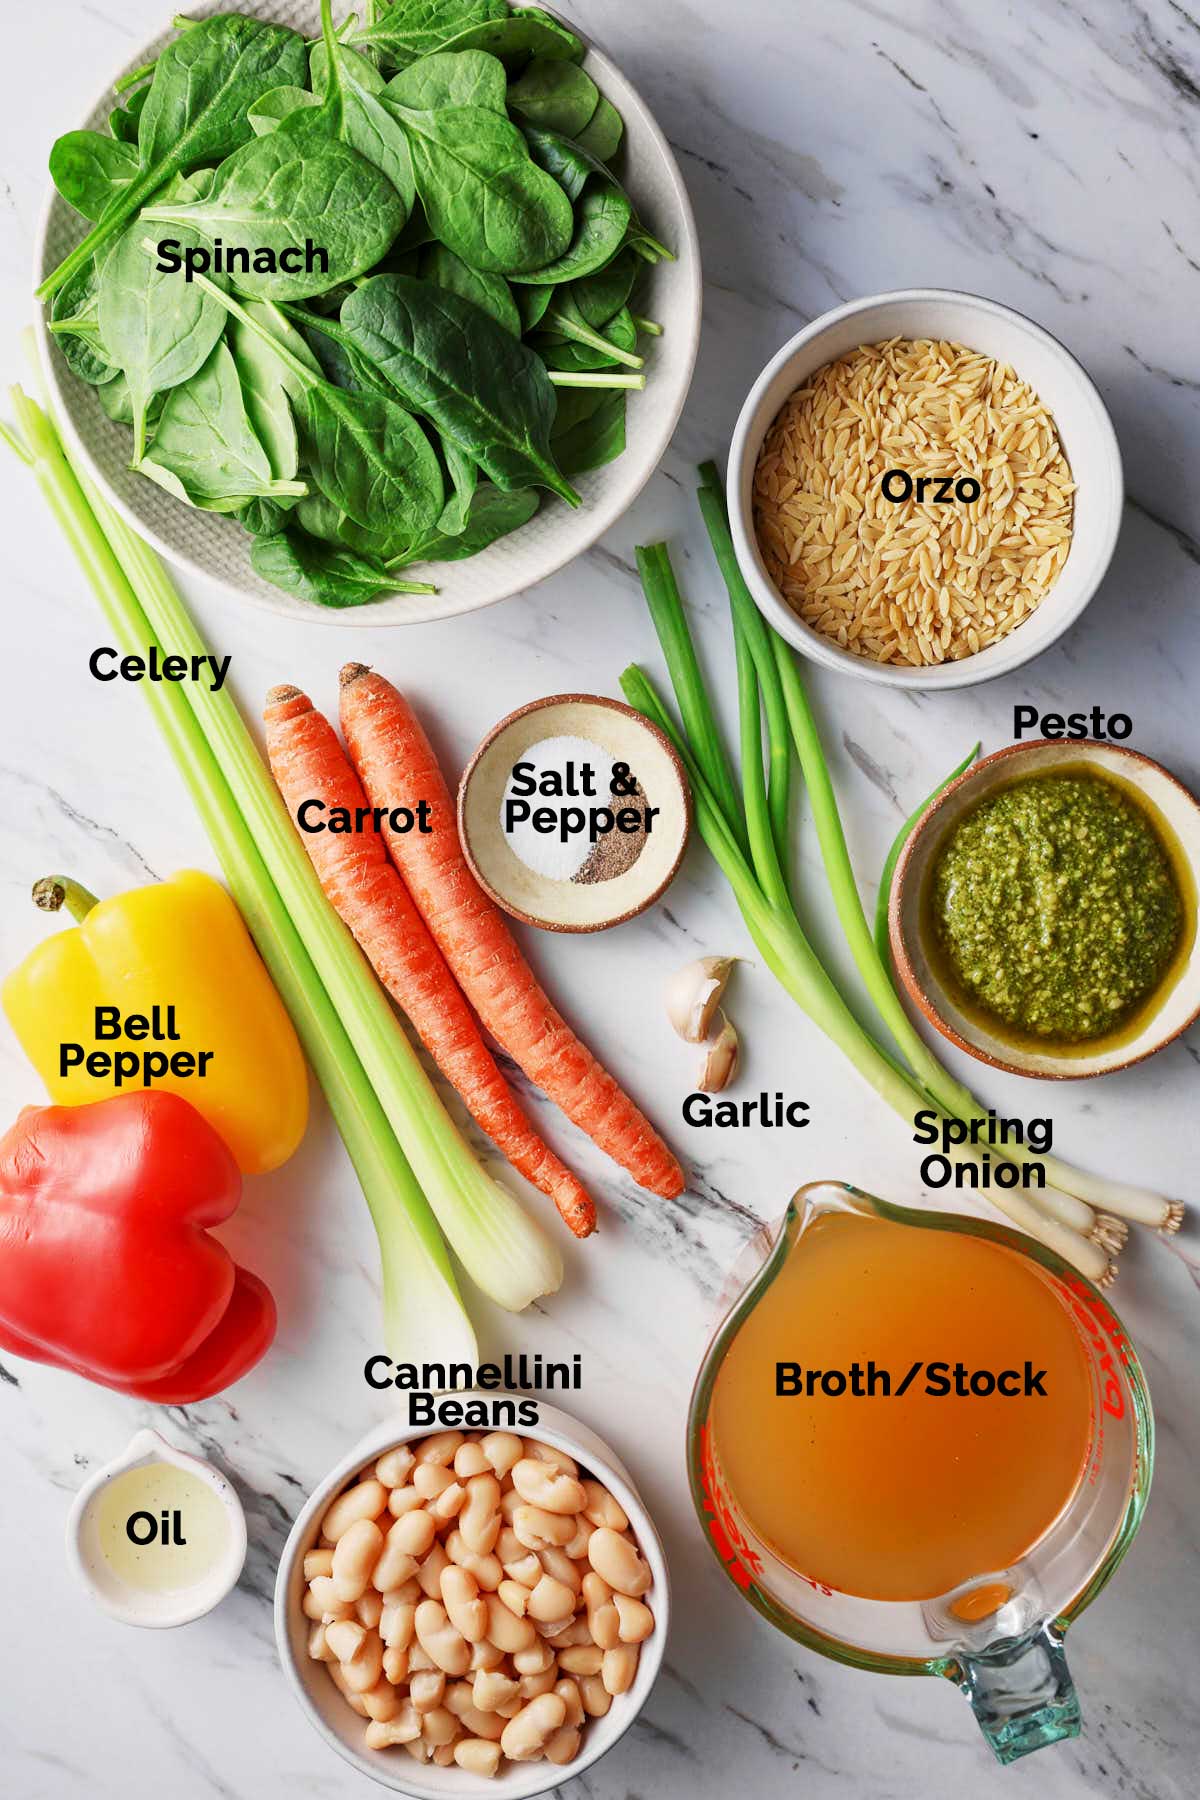 Ingredients to prepare vegetable orzo soup with pesto are laid on a flat surface.